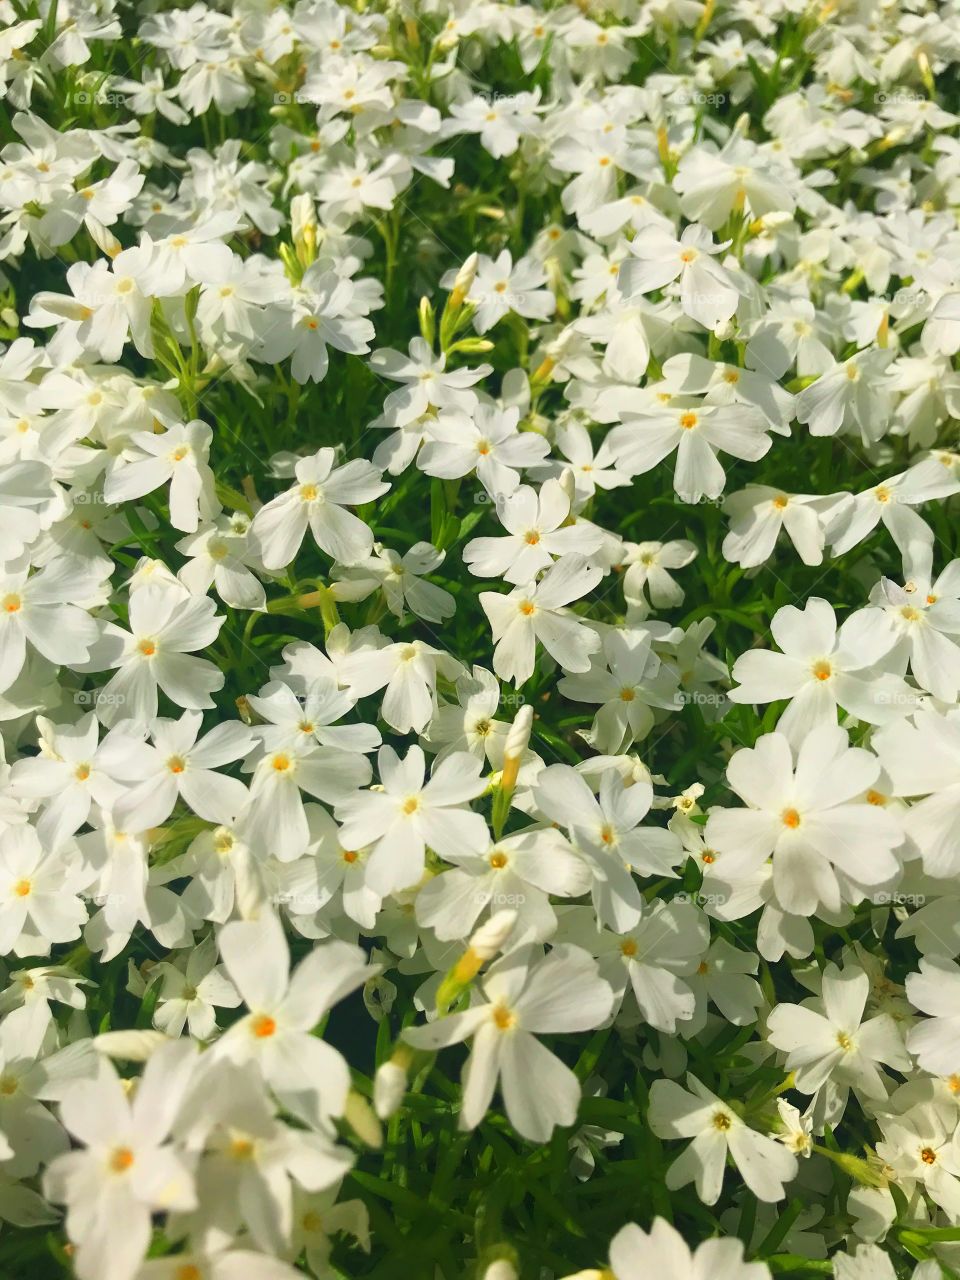 Small white phlox flowers growing and blooming in a bush of a garden on a warm spring day